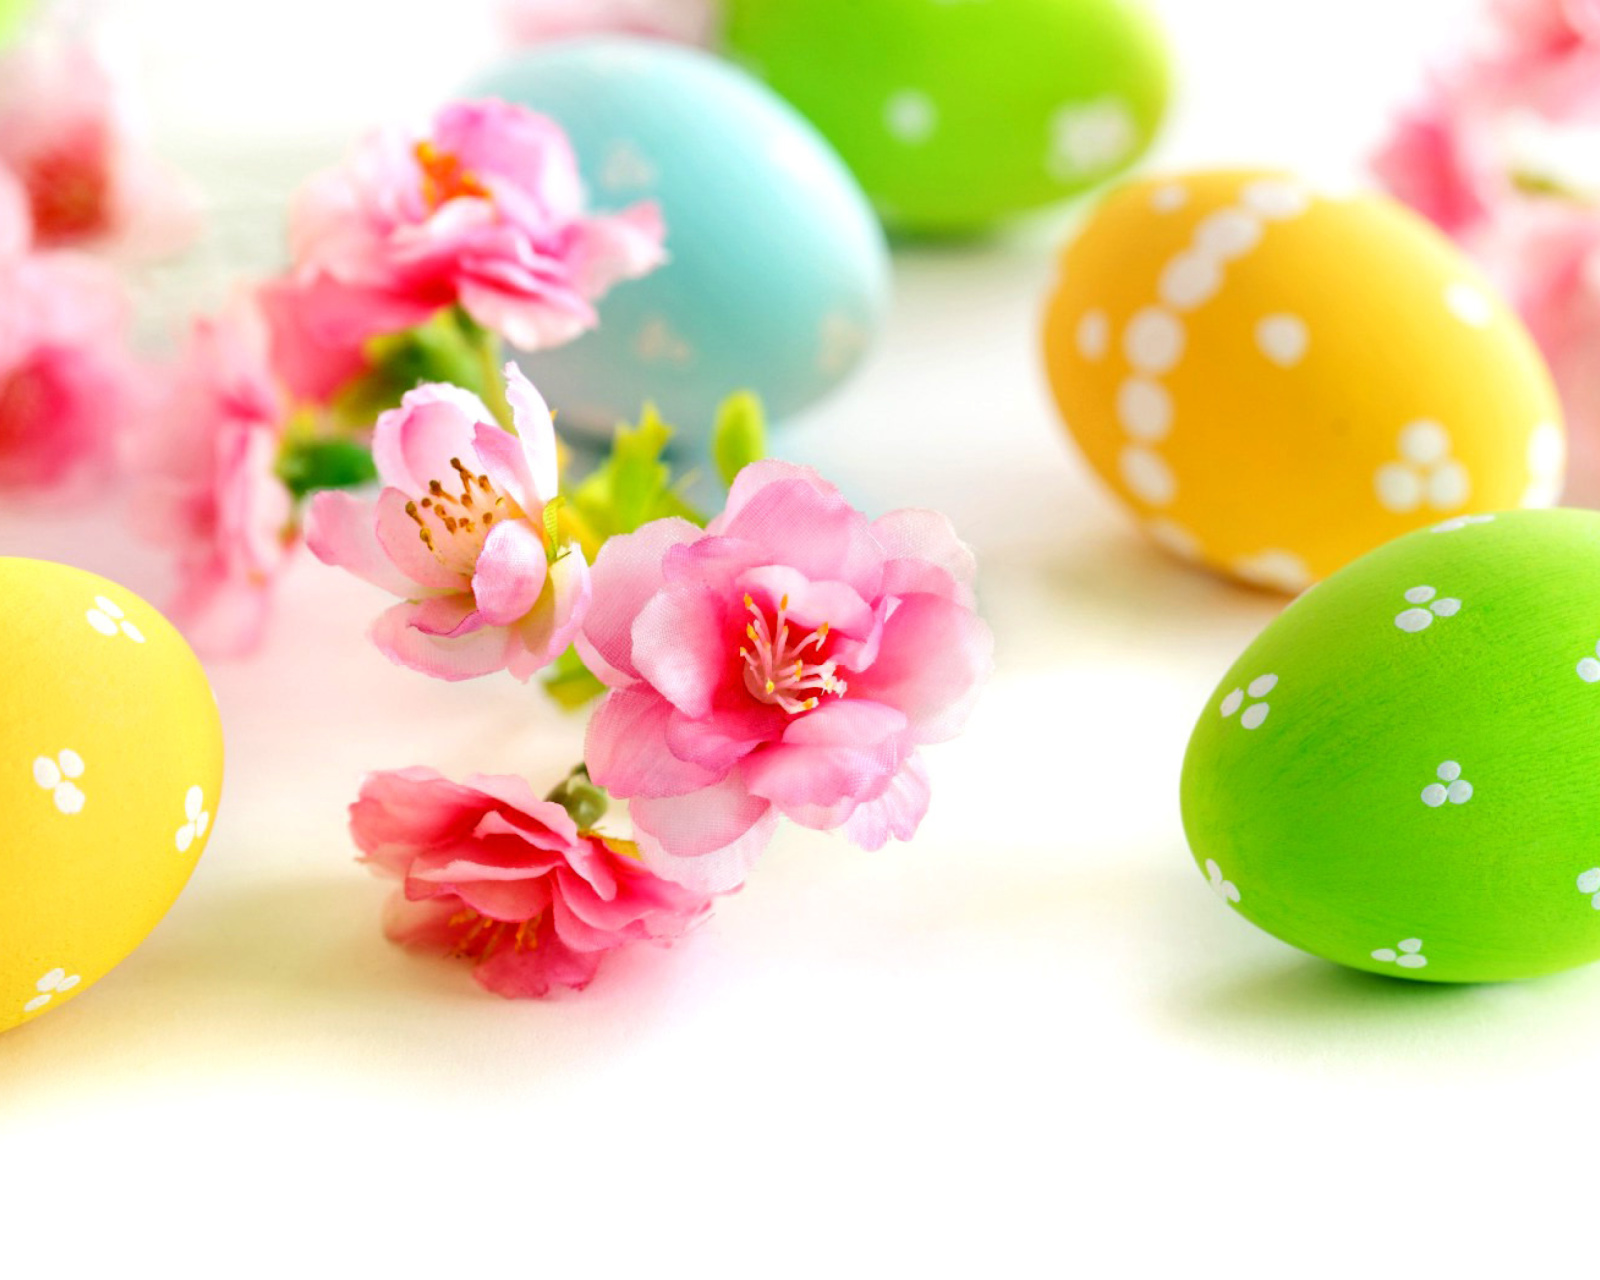 Easter Eggs and Spring Flowers wallpaper 1600x1280